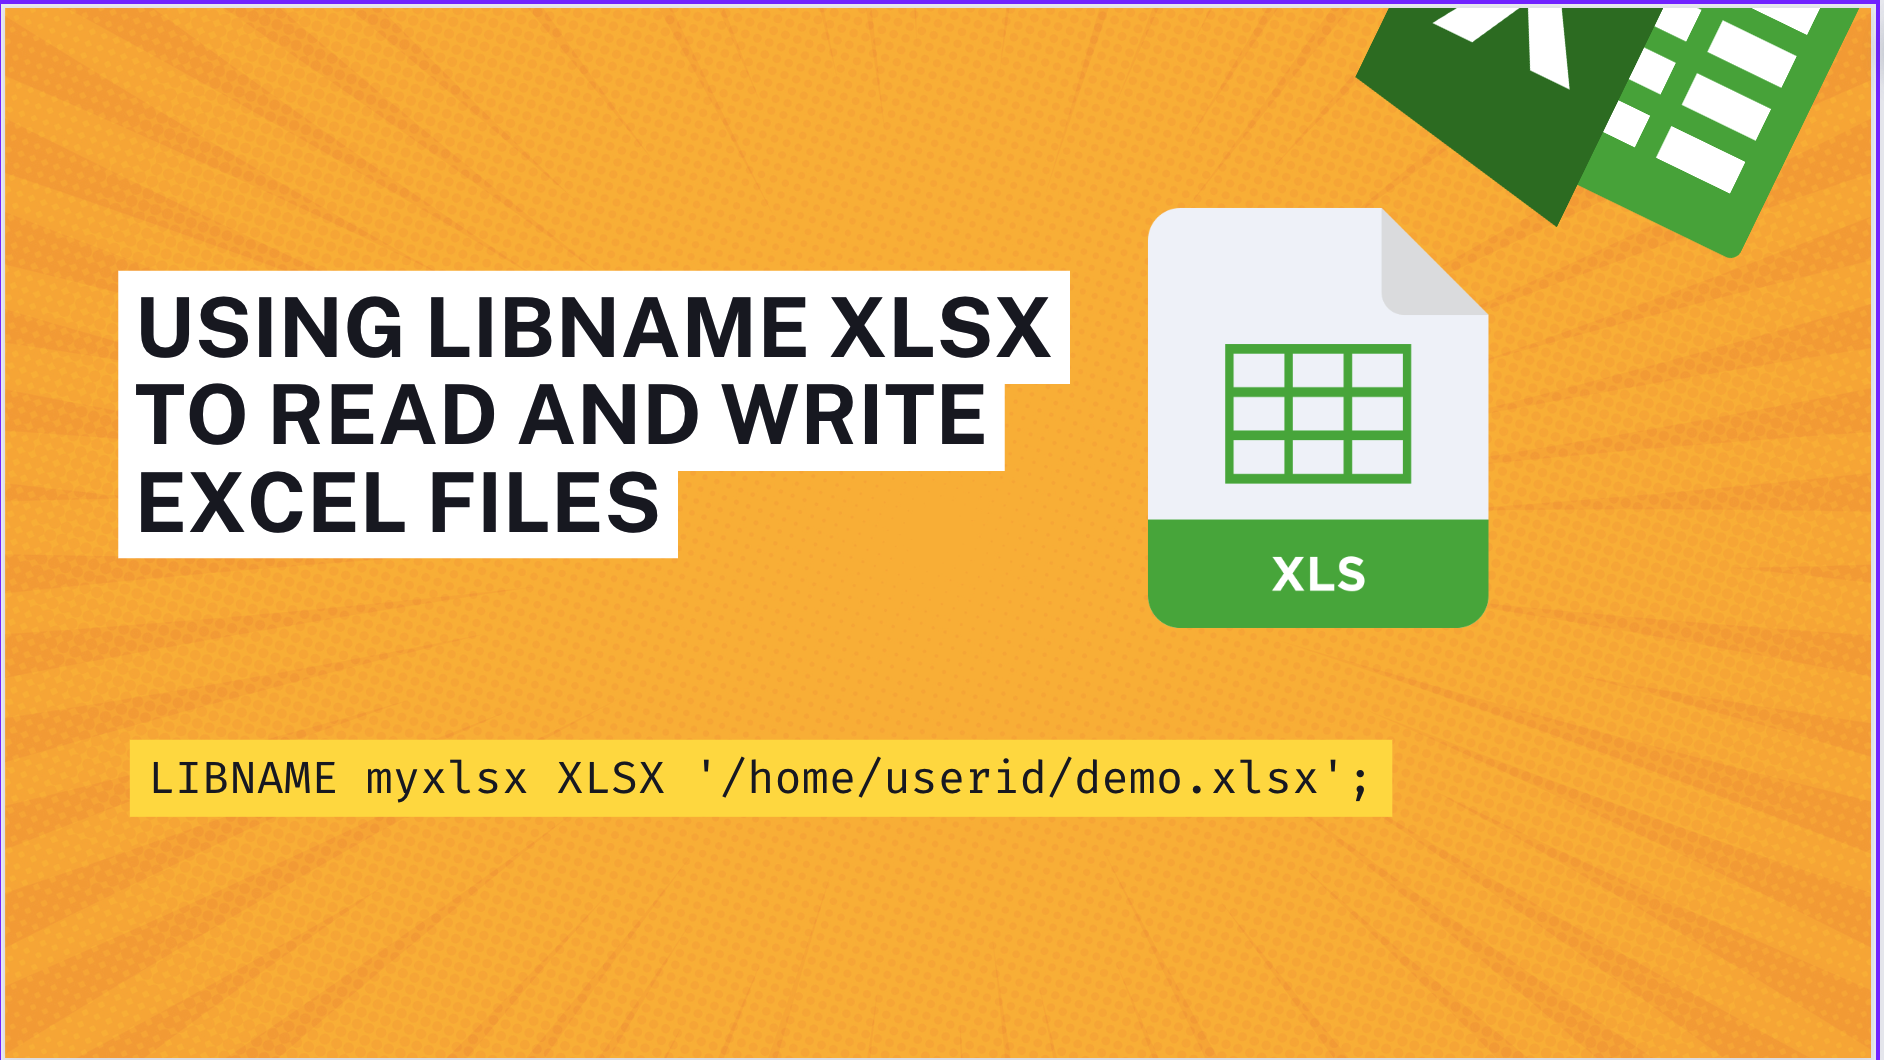 Using LIBNAME XLSX to read and write Excel files